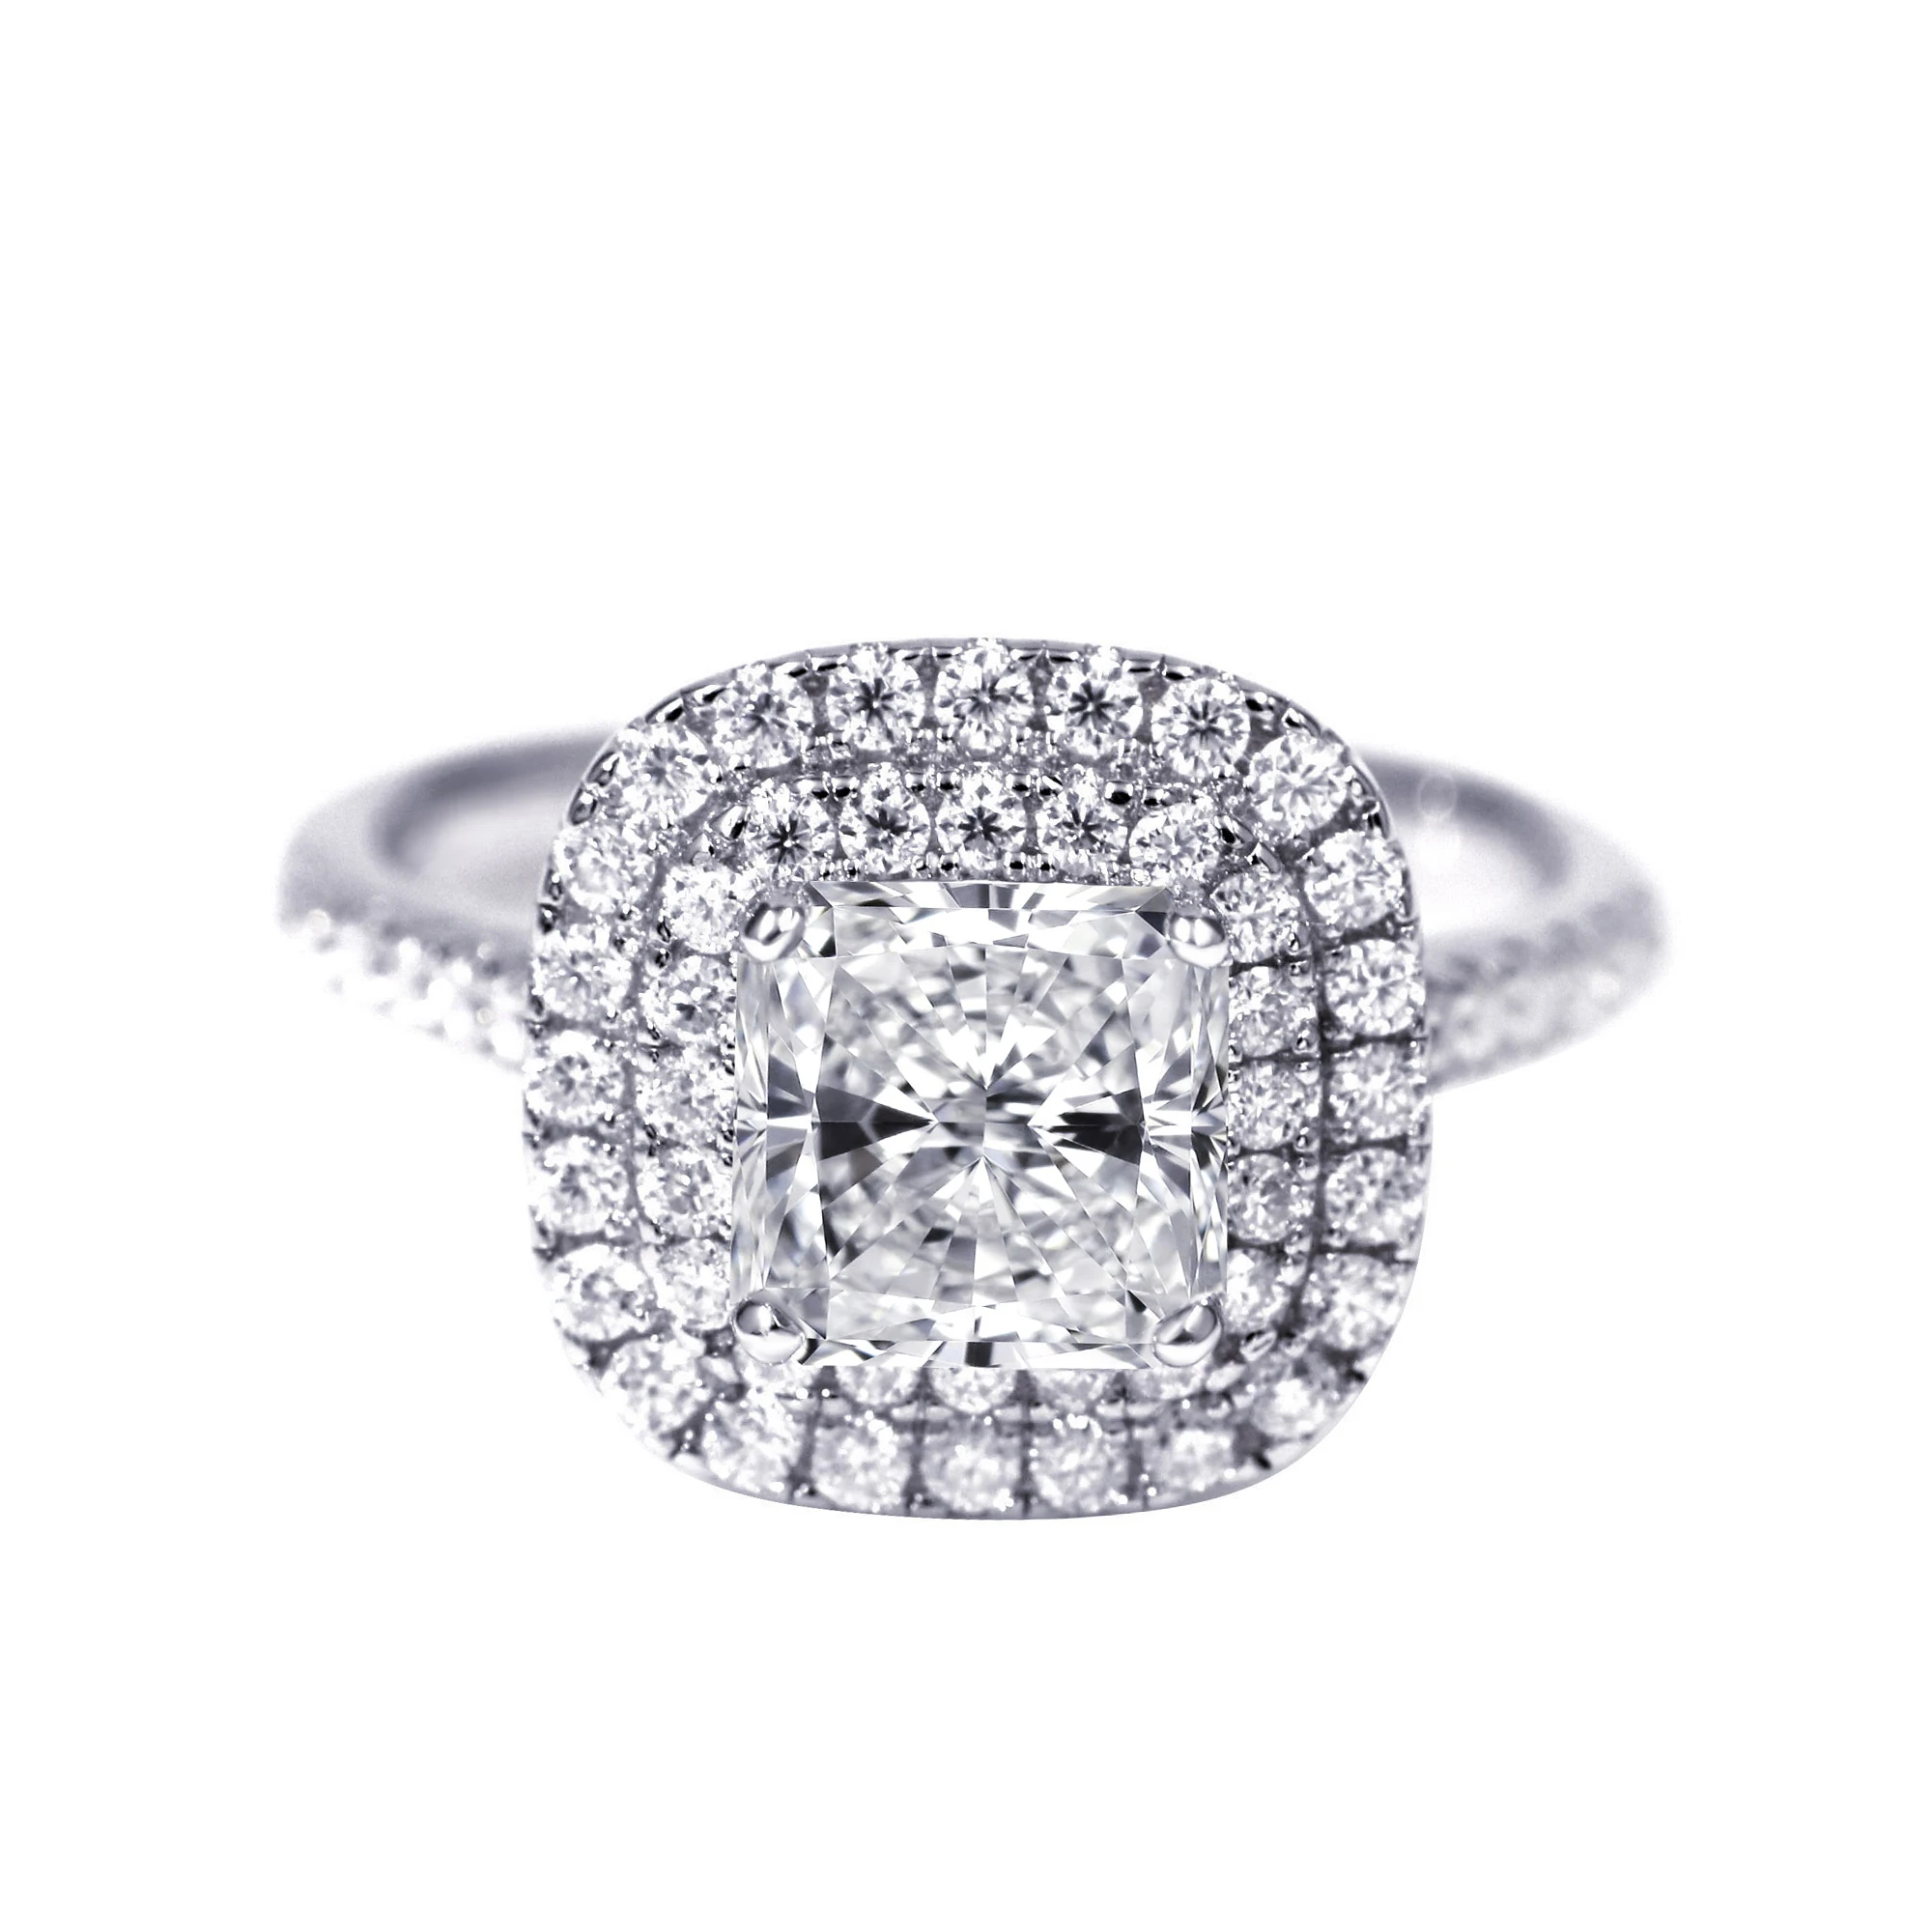 

Tianyu Gems 6.5mm Radiant Cut Moissanite Engagement Rings 925 Silver 18K White Gold Plated 1.6ctw DEF Diamonds Women Halo Ring